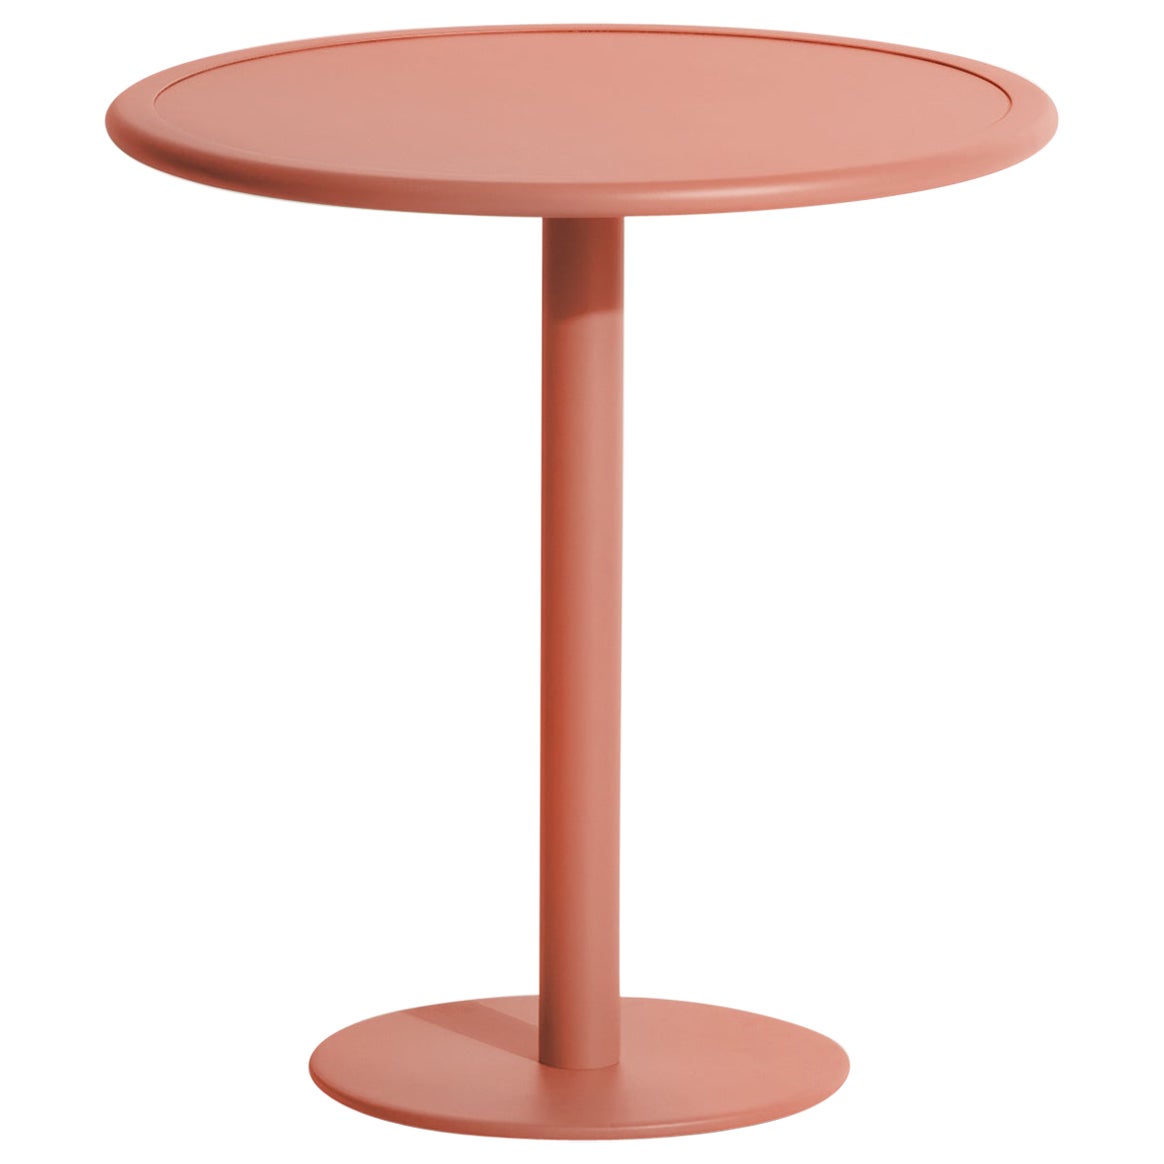 Petite Friture Week-End Bistro Round Dining Table in Coral Aluminium, 2017 For Sale